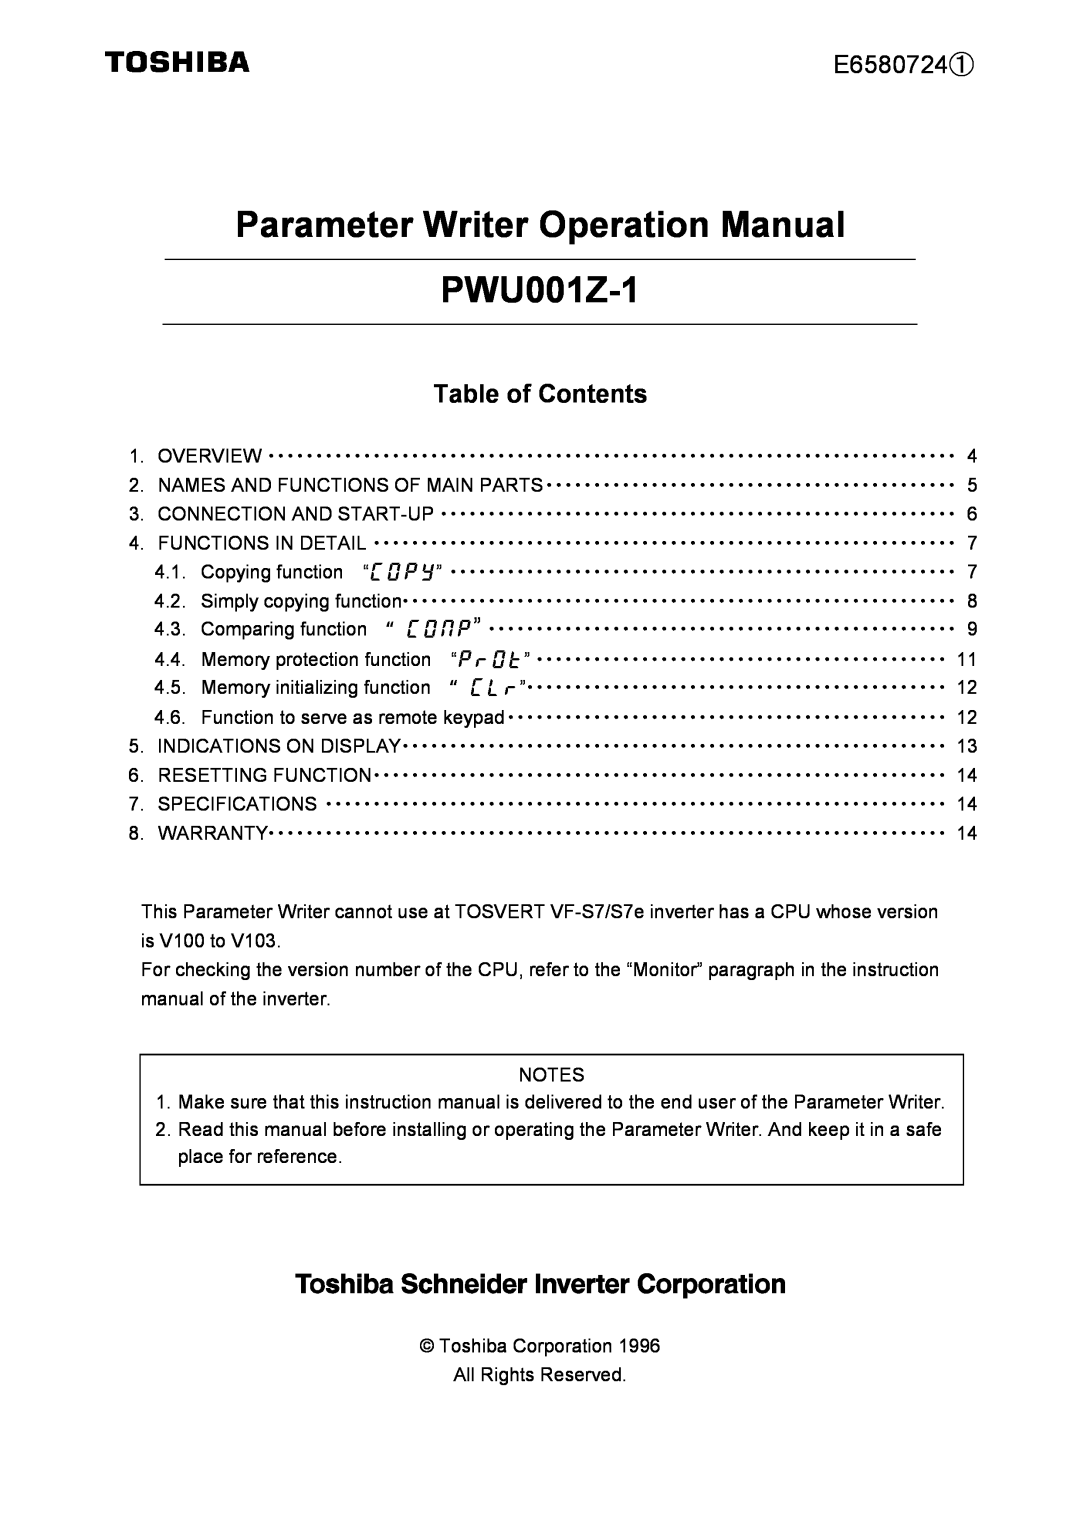 Toshiba operation manual E6580724①, Table of Contents, Parameter Writer Operation Manual PWU001Z-1 